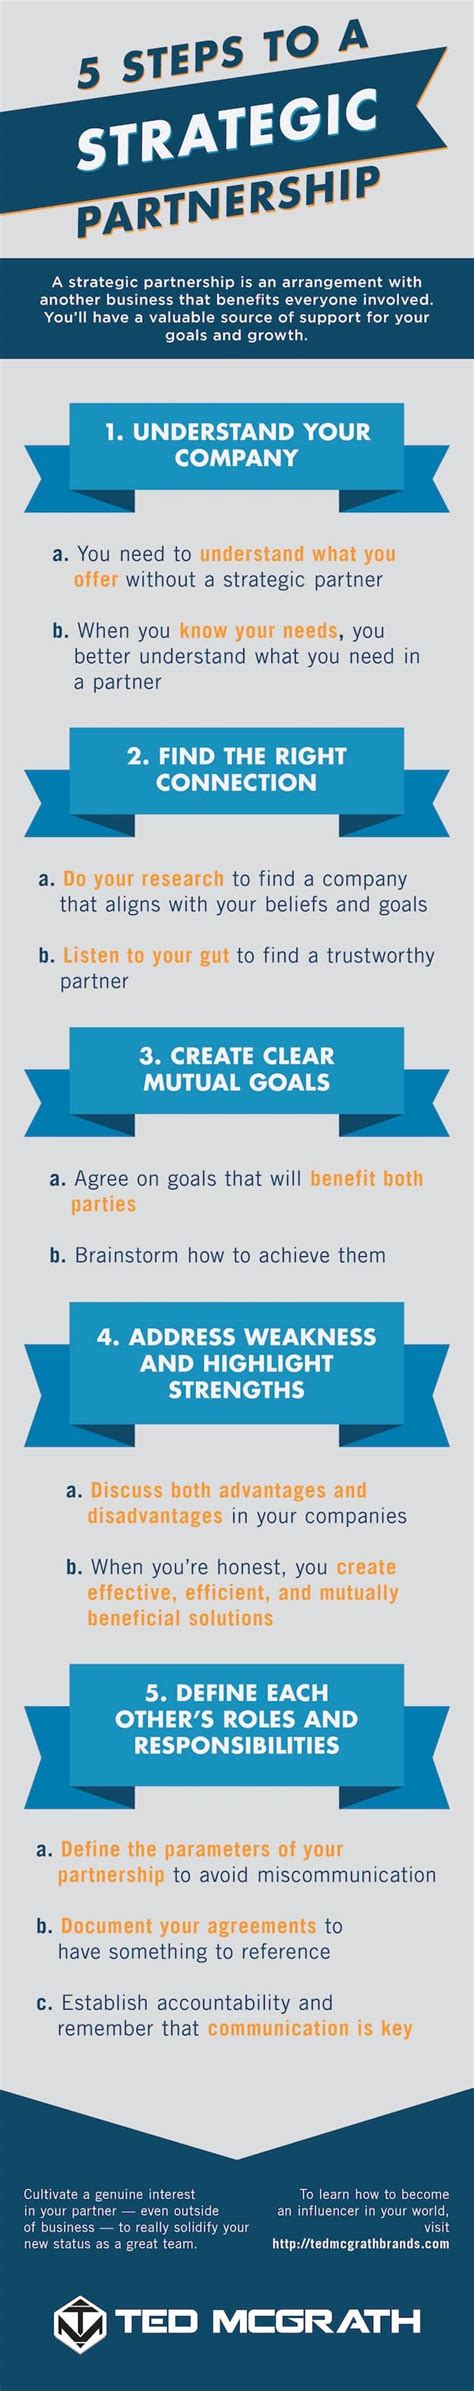 What Is Strategic Partnership 5 Tips To Developing A Successful One